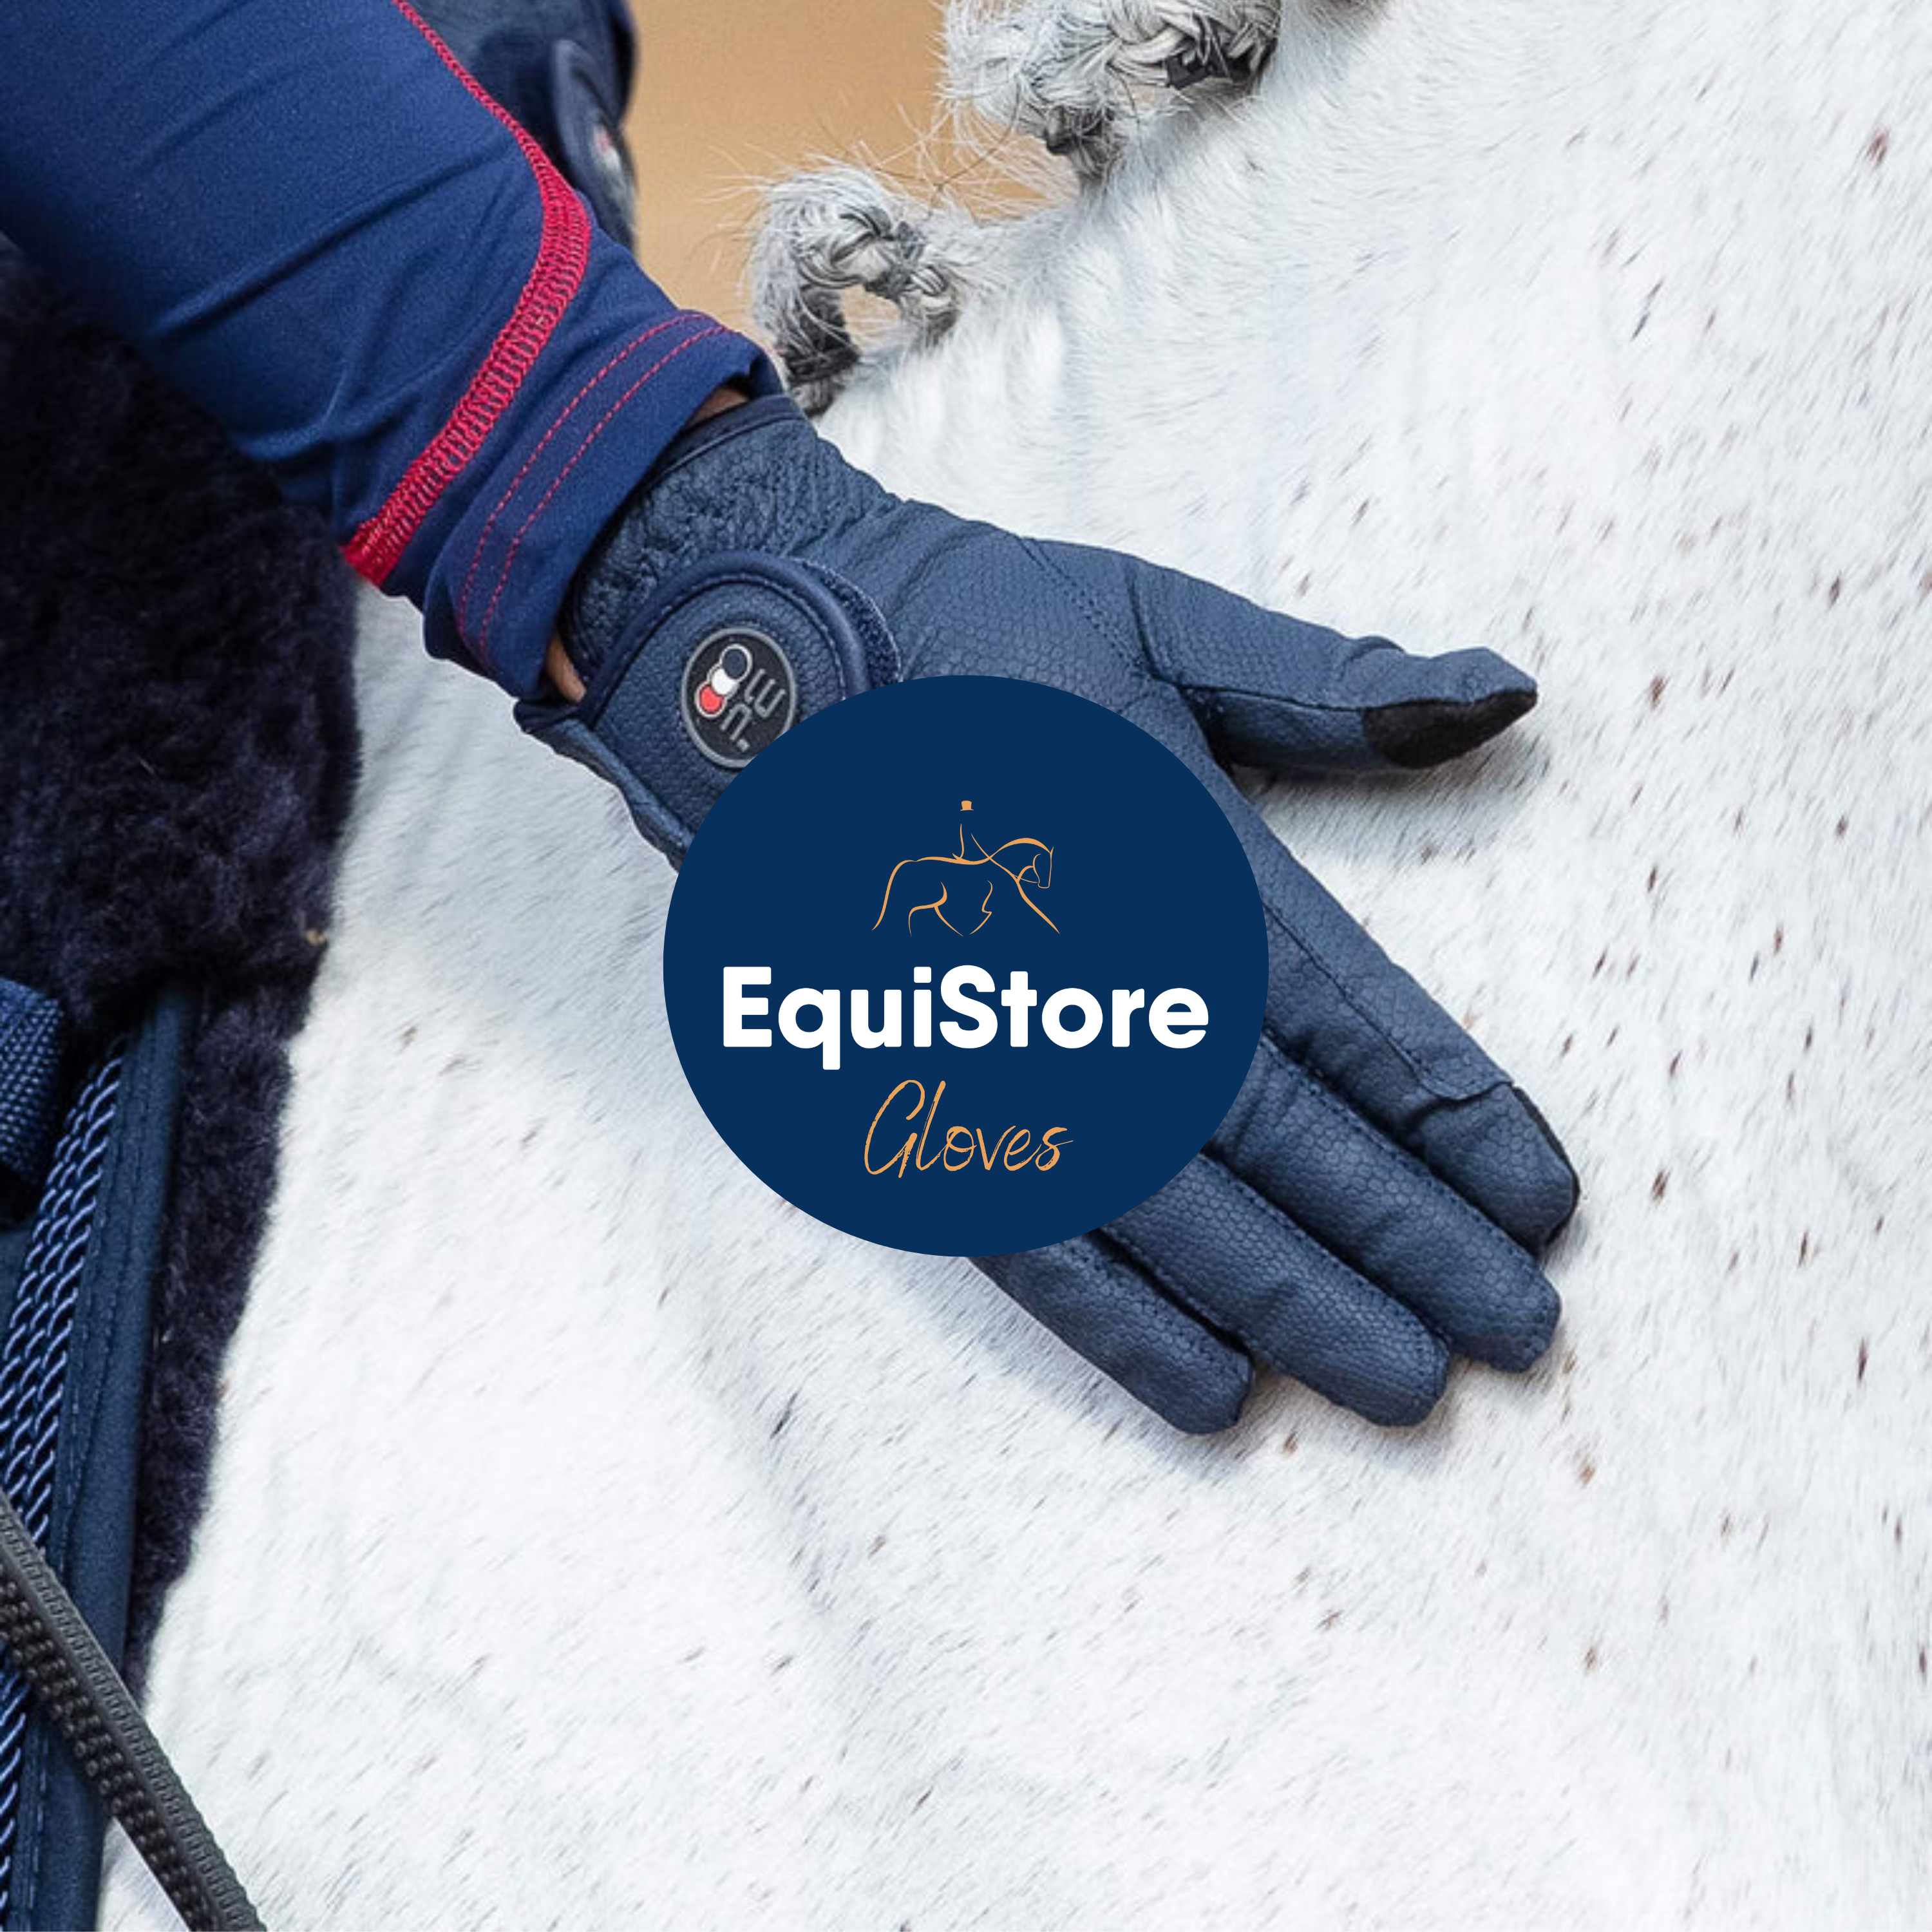 A range of great quality horse riding gloves